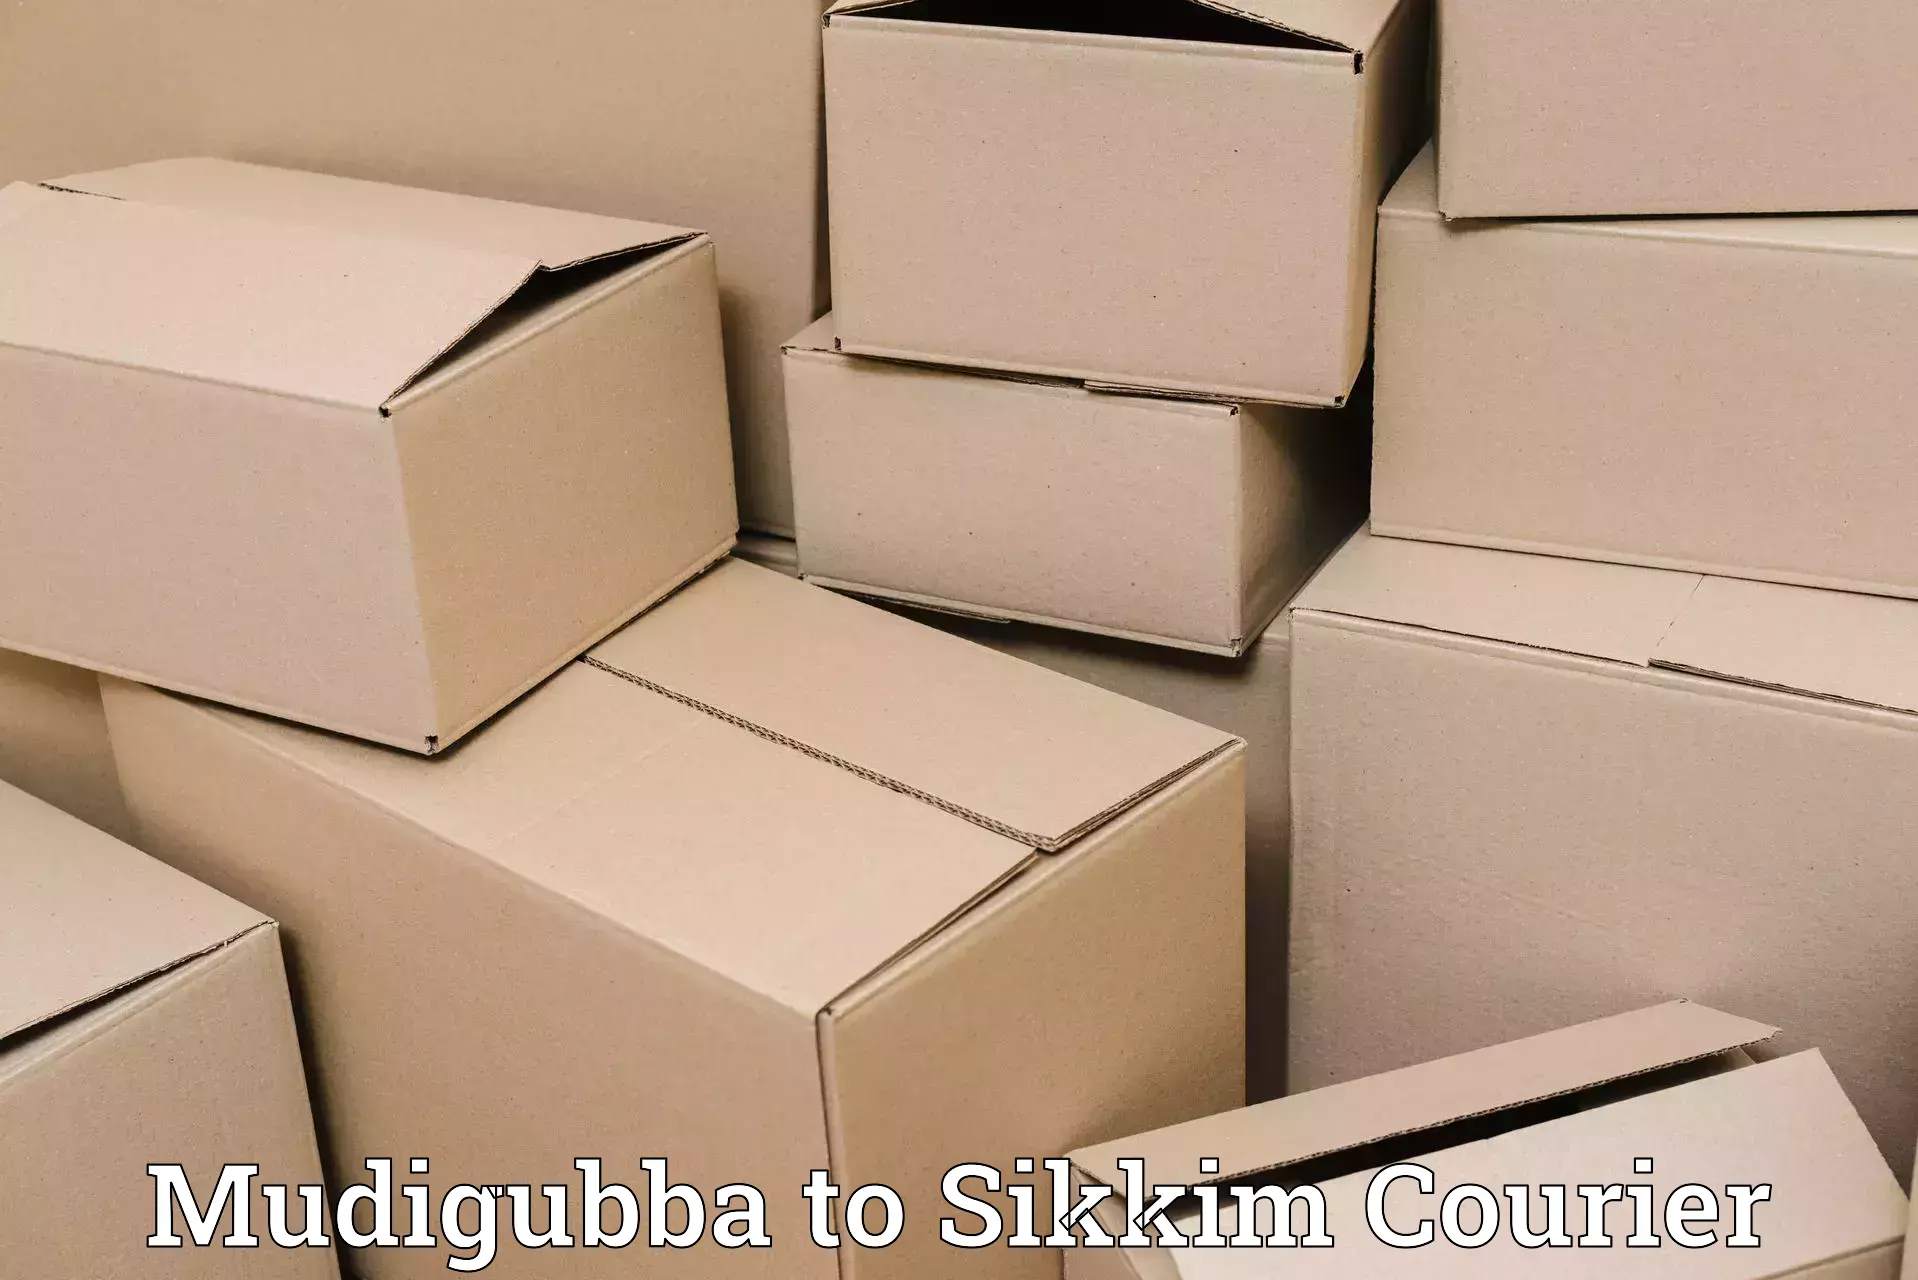 Courier service efficiency Mudigubba to Pelling